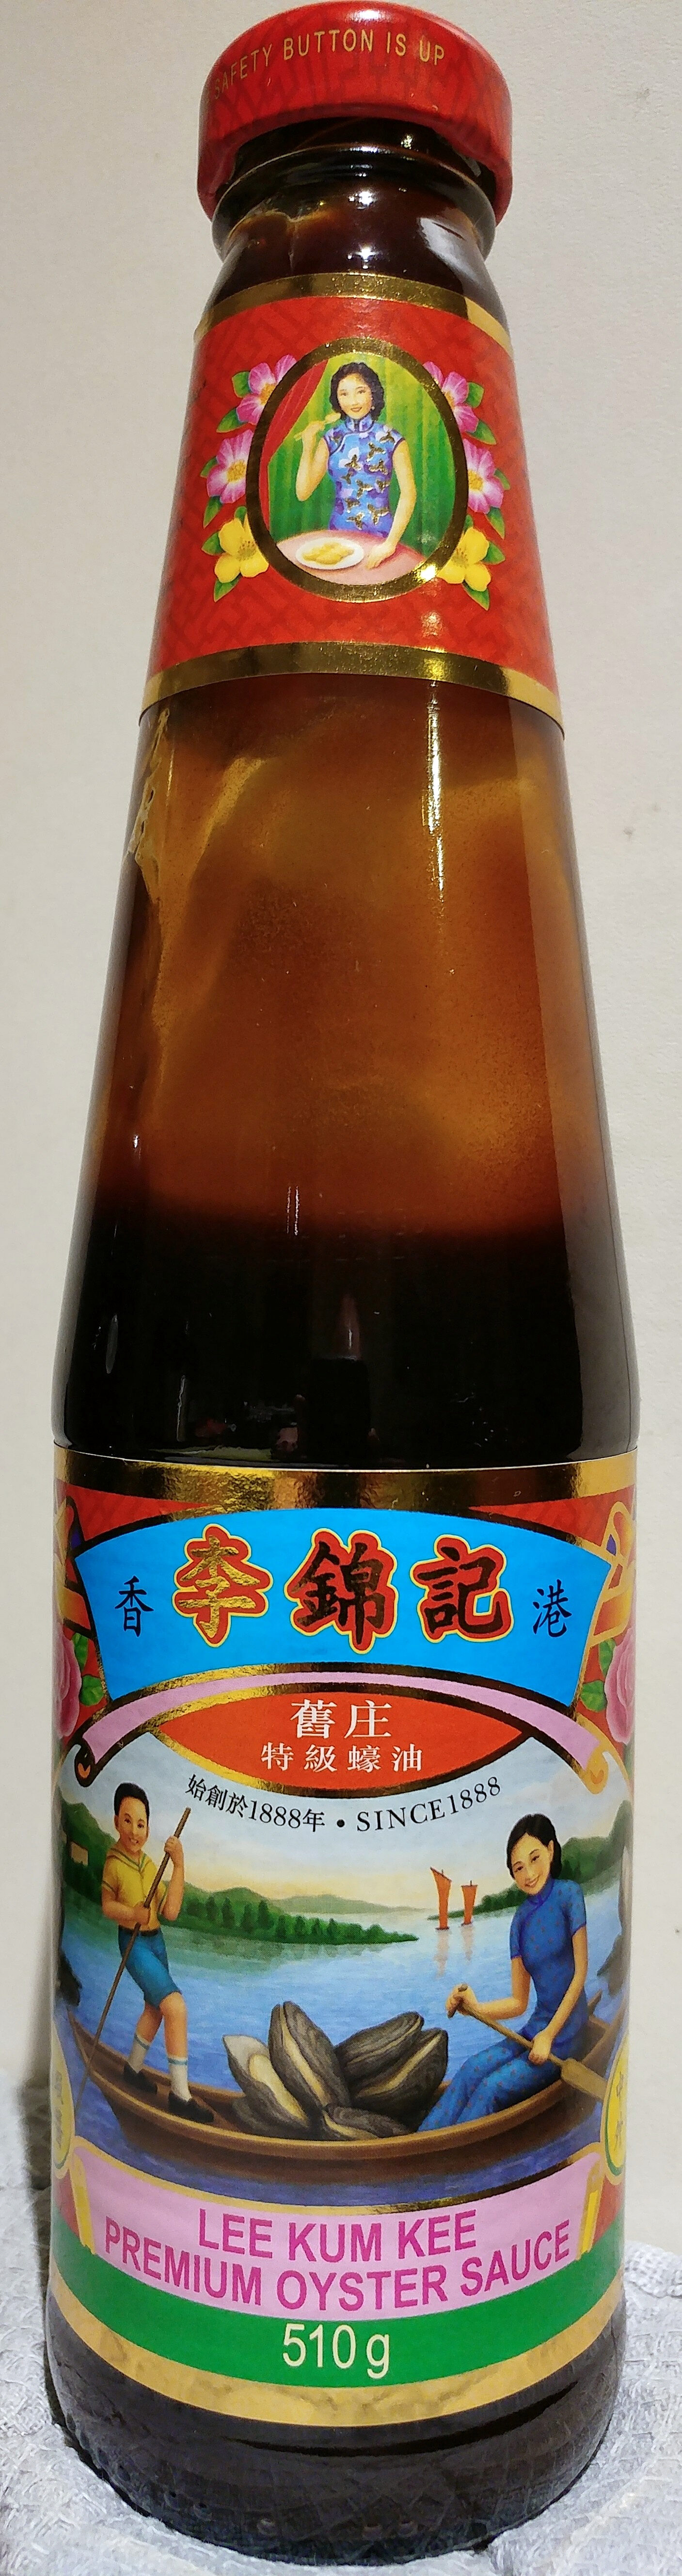 Premium Oyster Sauce - Product